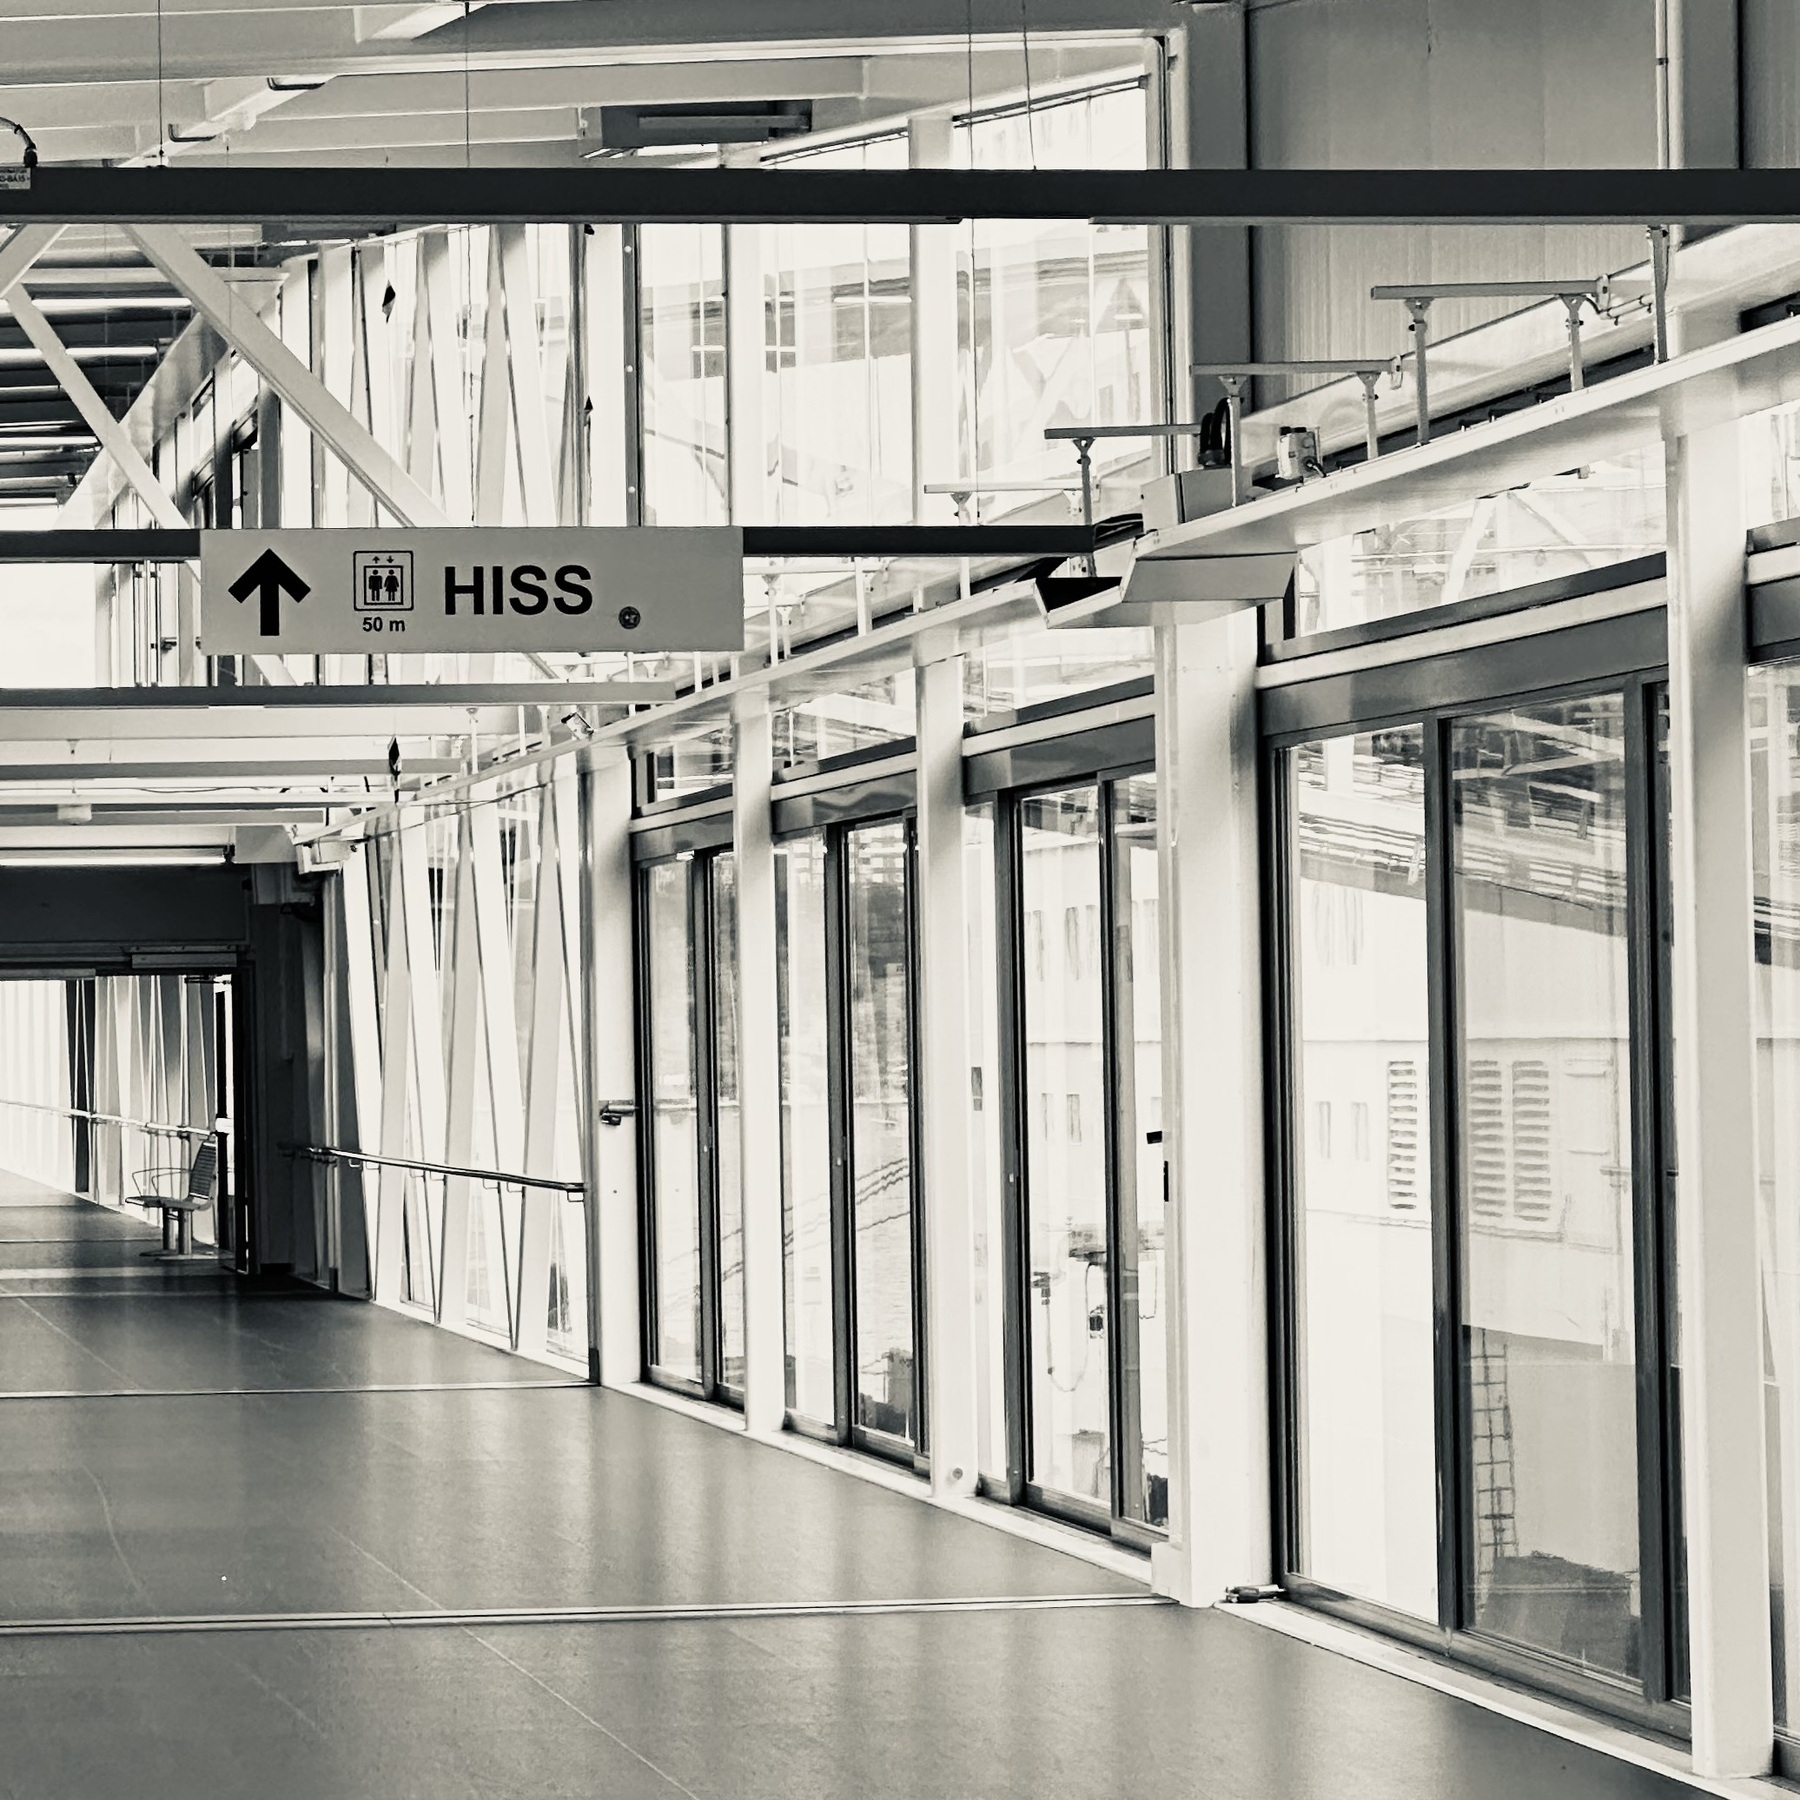 An empty corridor with a sign that says “HISS”.